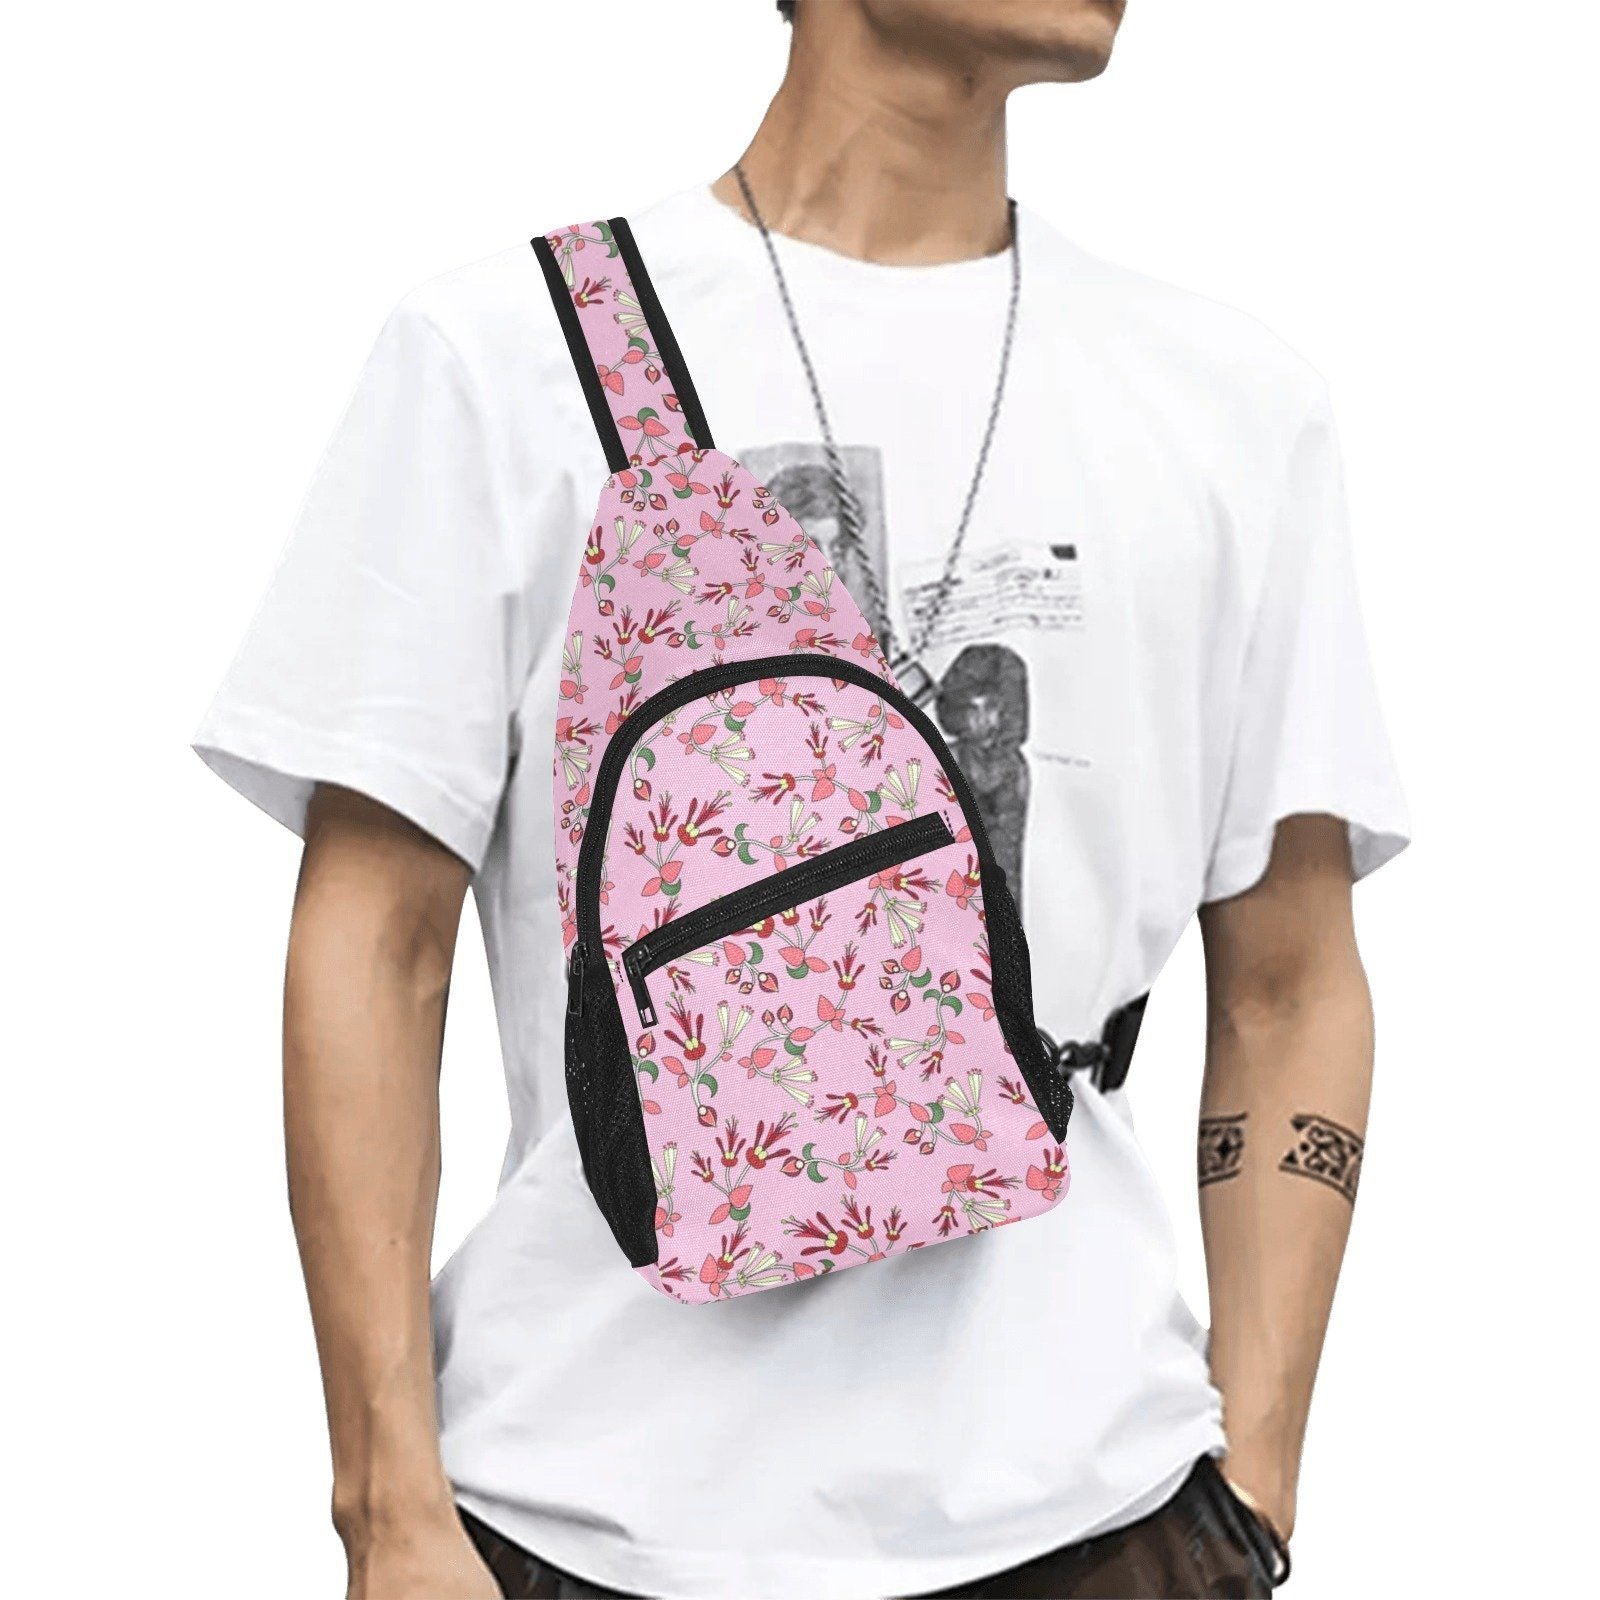 Strawberry Floral All Over Print Chest Bag (Model 1719) All Over Print Chest Bag (1719) e-joyer 